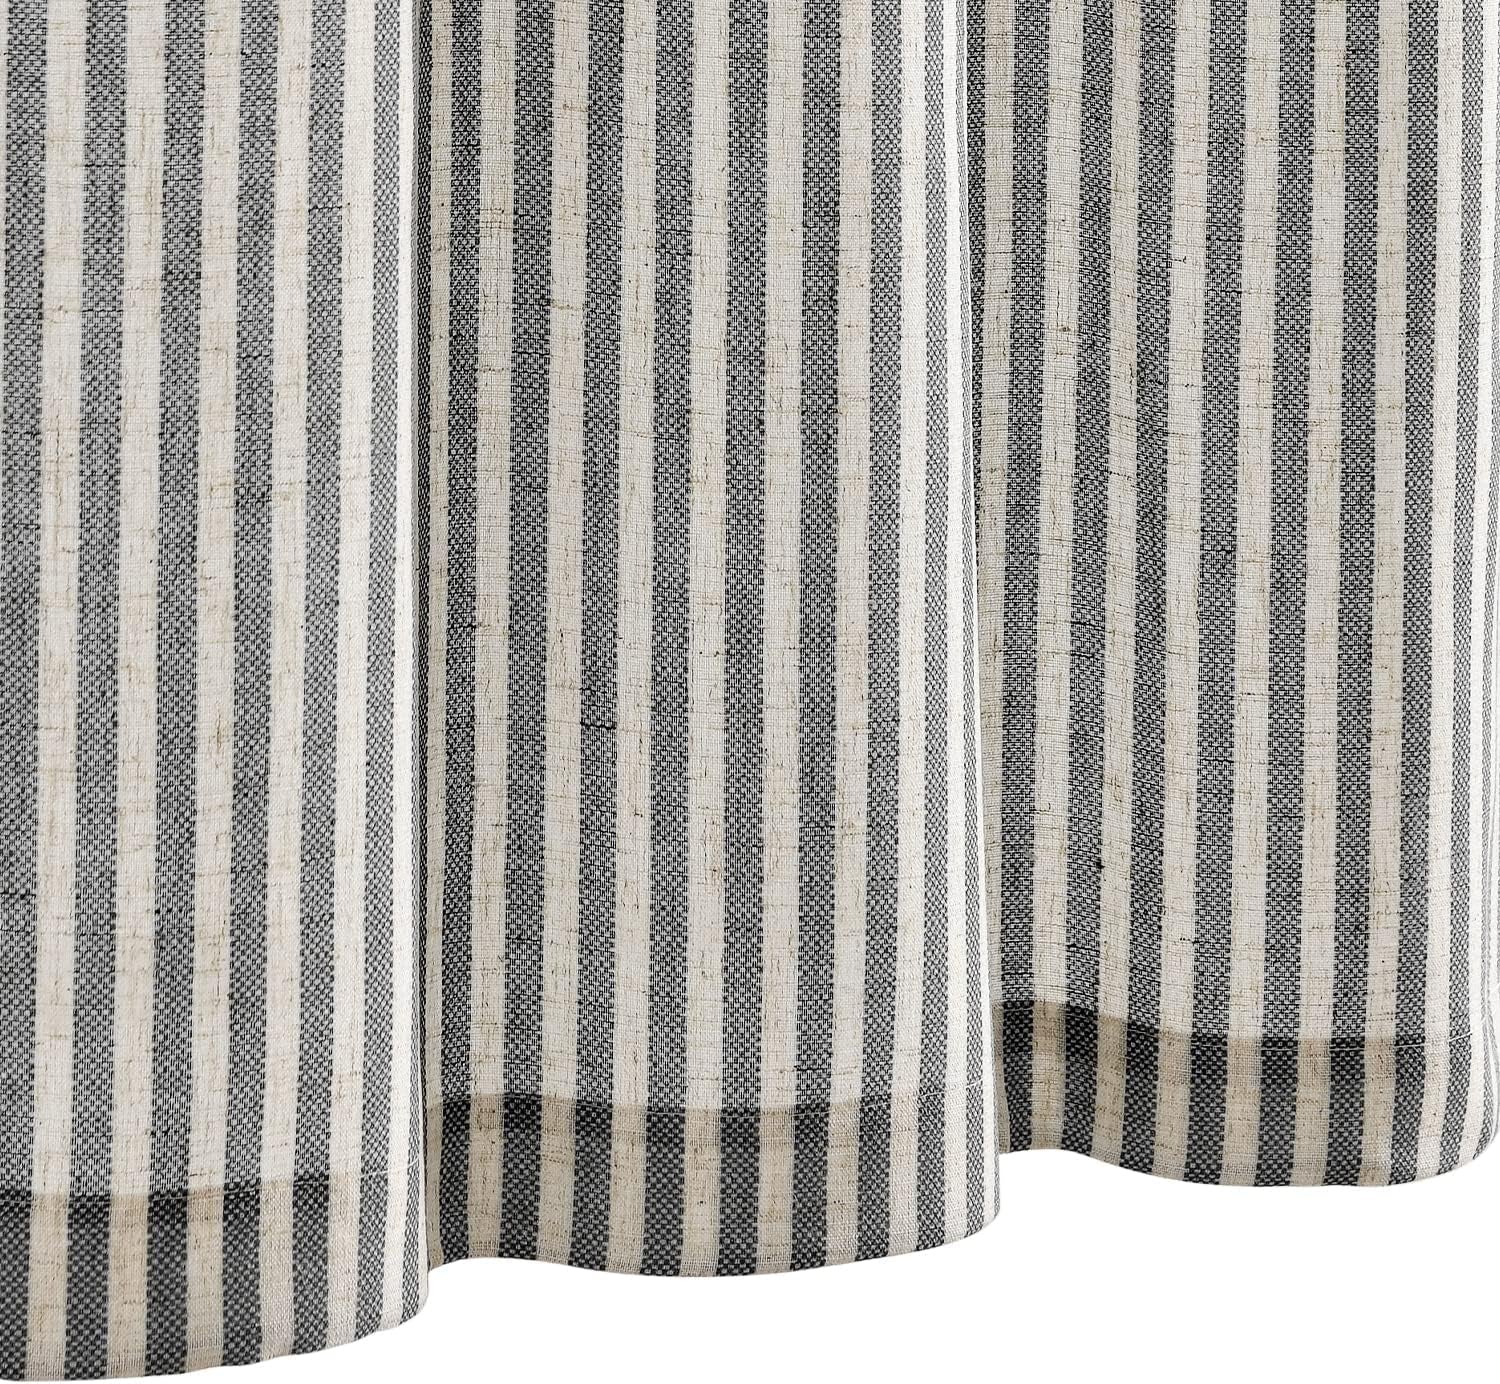 Jinchan Kitchen Curtains Striped Tier Curtains Ticking Stripe Linen Curtains Pinstripe Cafe Curtains 24 Inch Length for Living Room Bathroom Farmhouse Curtains Rod Pocket 2 Panels Black on Beige  CKNY HOME FASHION   